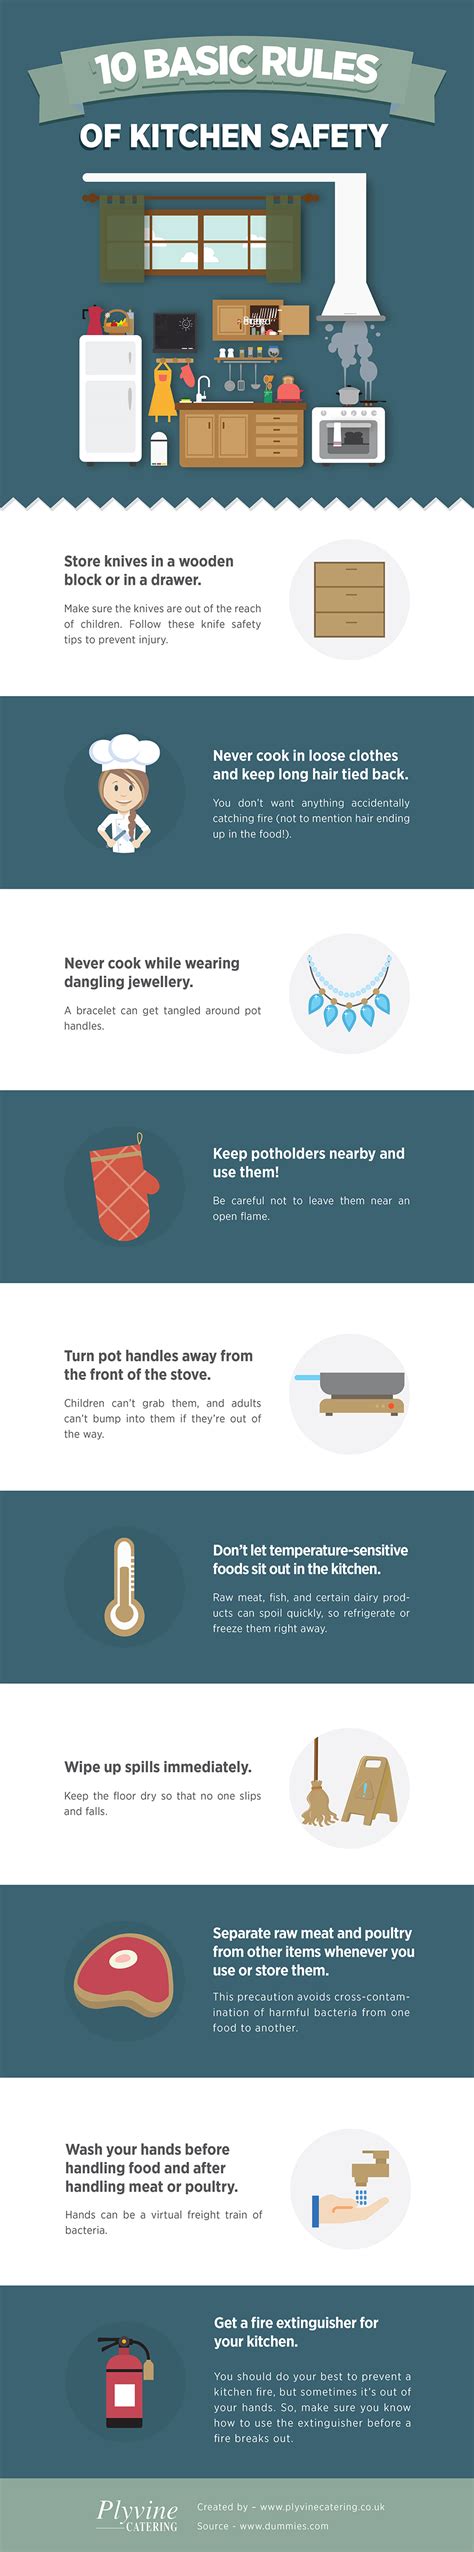 10 Basic Rules of Kitchen Safety - Plyvine Catering